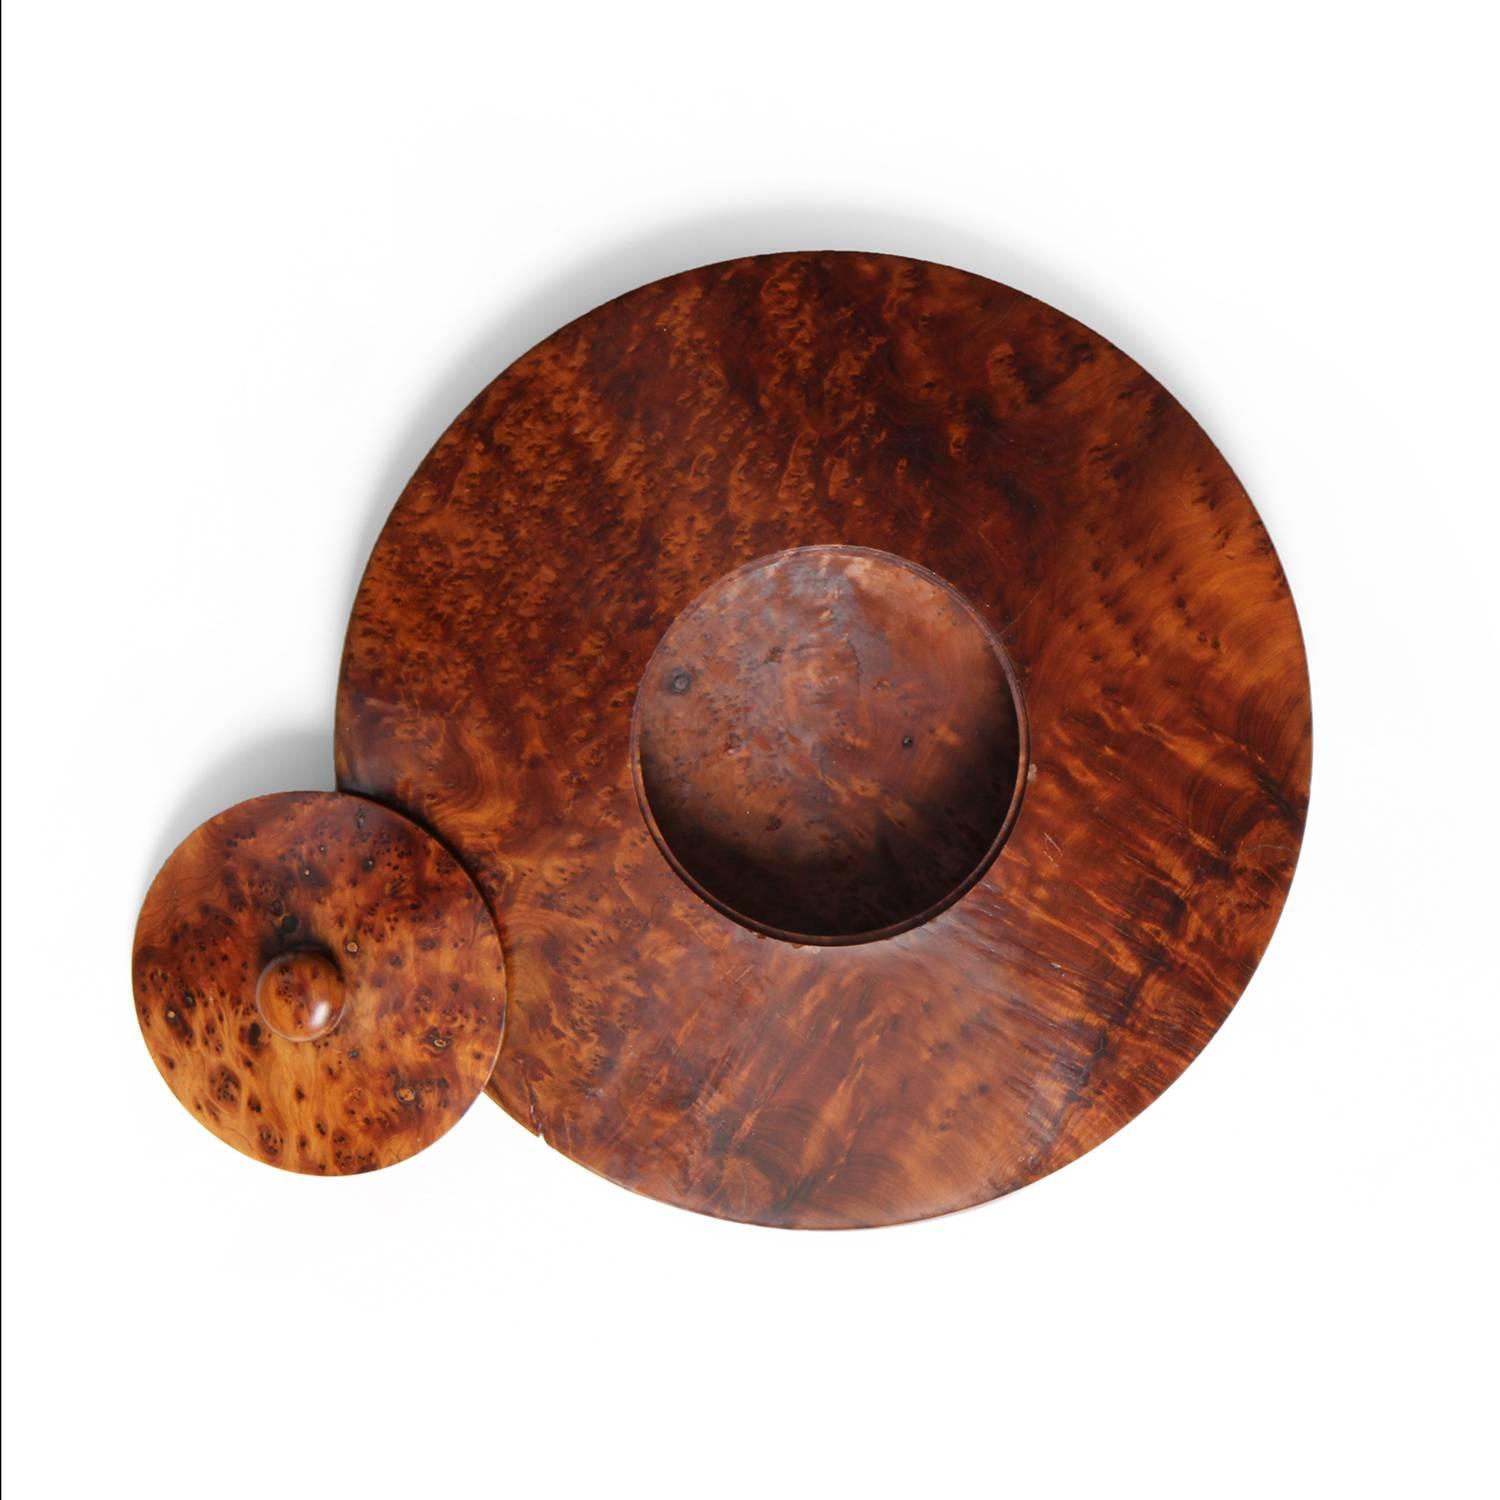 An incredible and highly expressive hollowed artist made lidded vessel having a precision flattened ovoid form and crafted of dramatically figured caramel-toned birch burl.